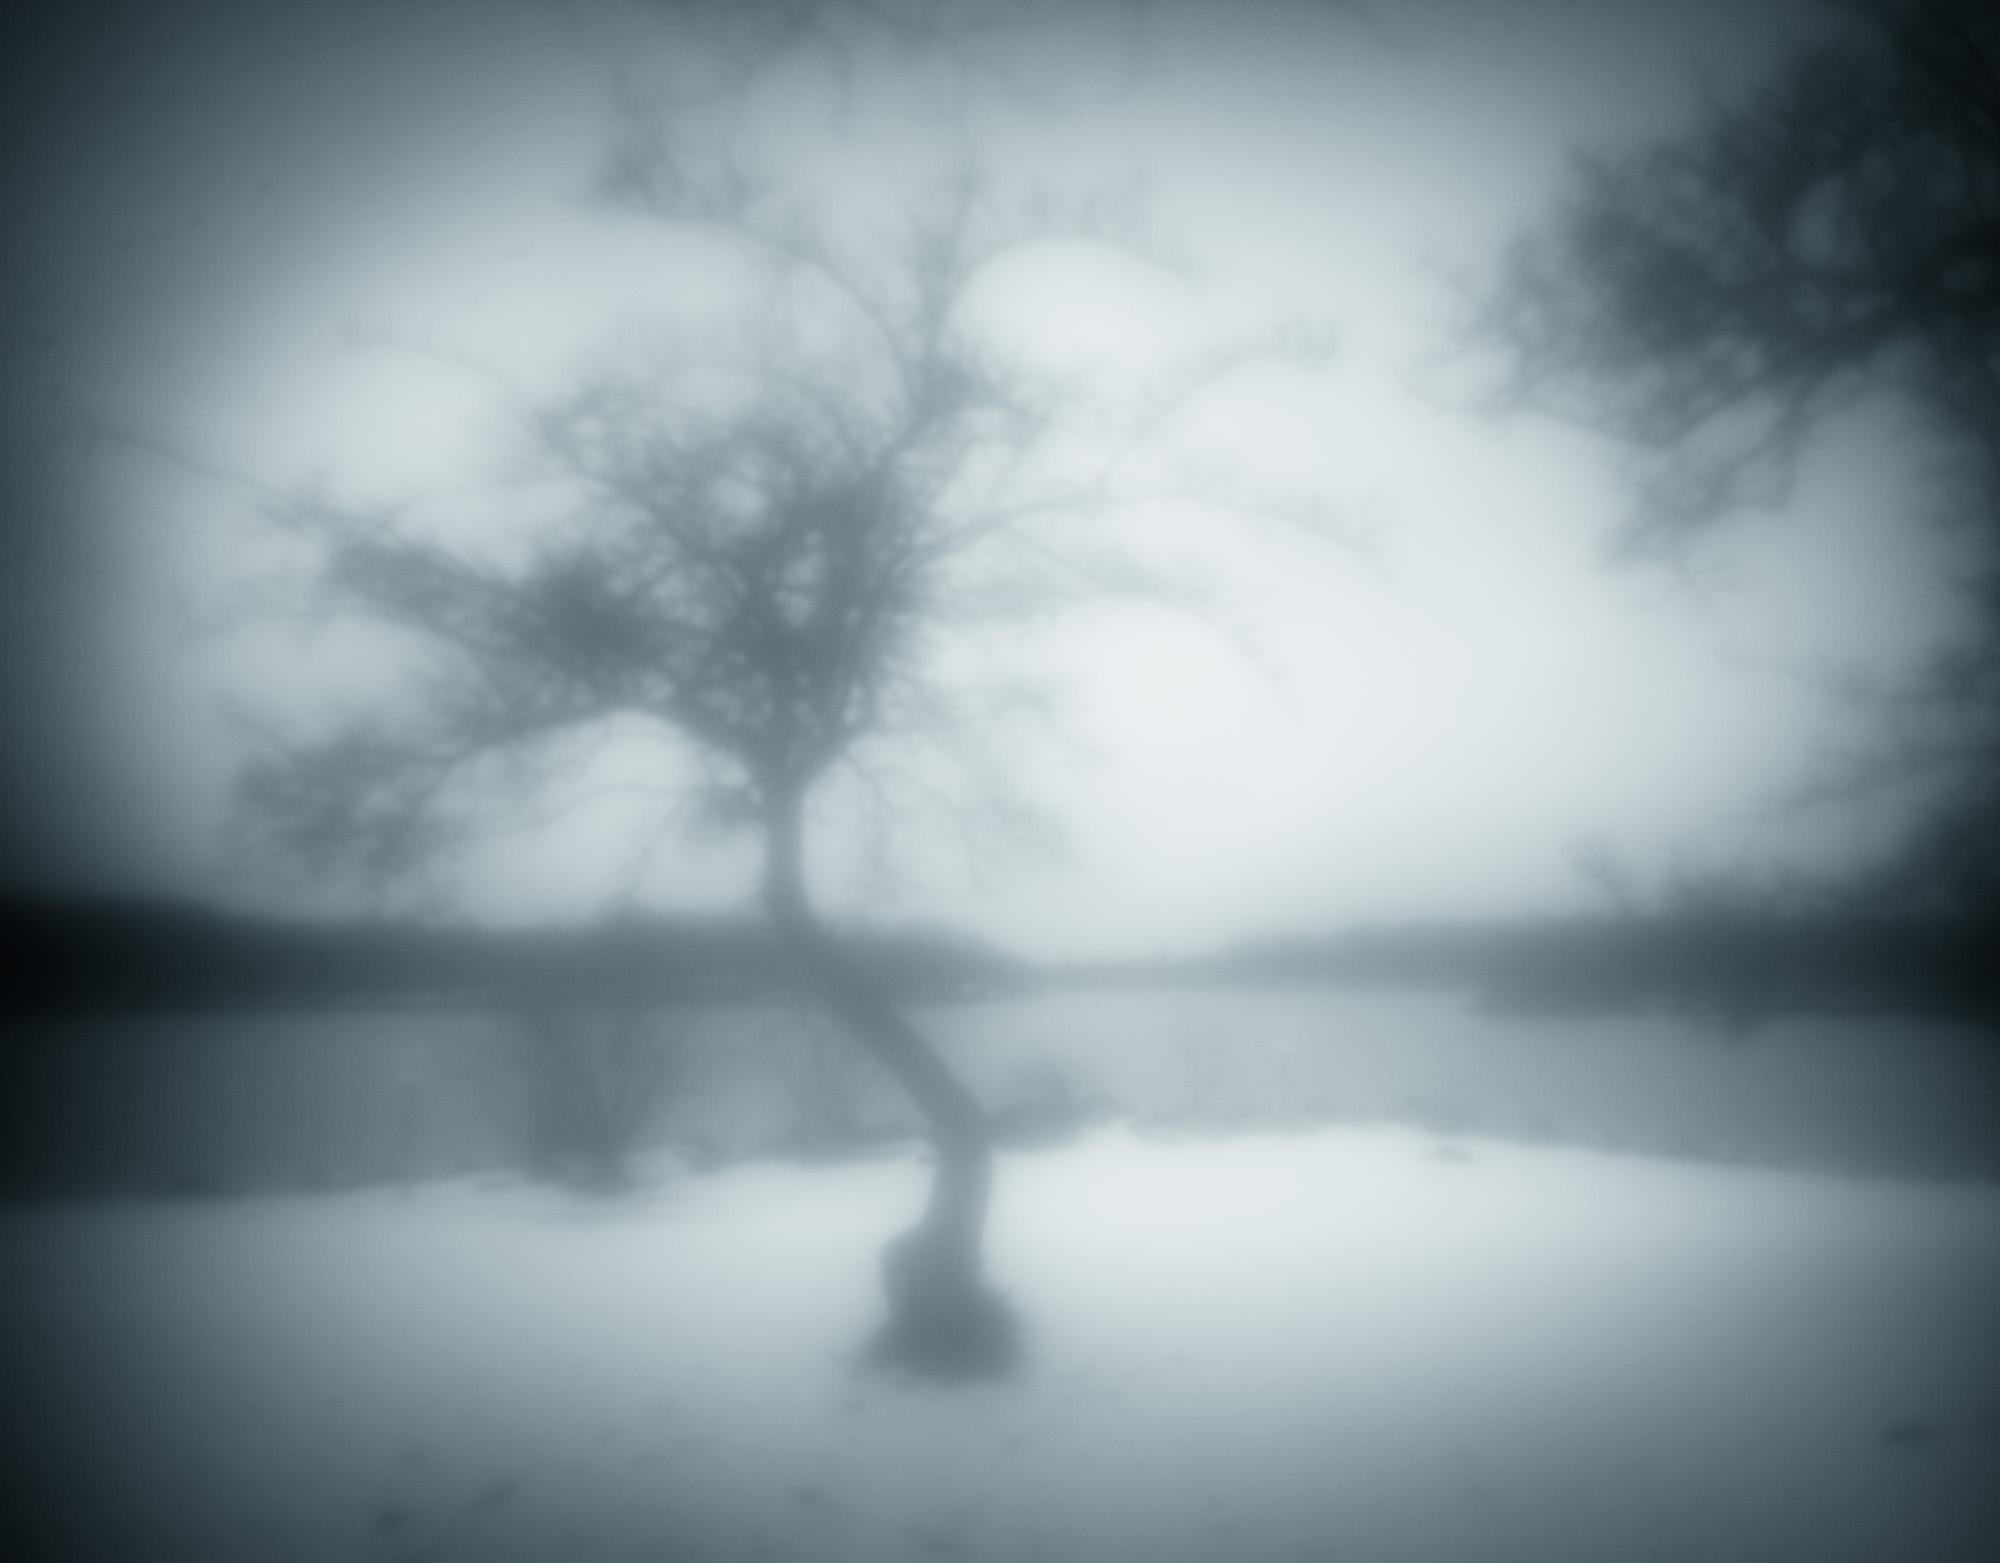 Limited Edition Black and White Photograph  "One Winter Tree" 20 x 24

Limited edition black and white cool tone photograph on archival pigment print. A dreamy ethereal photograph made in the winter of 2021 on the edge of a frozen lake. "One Winter